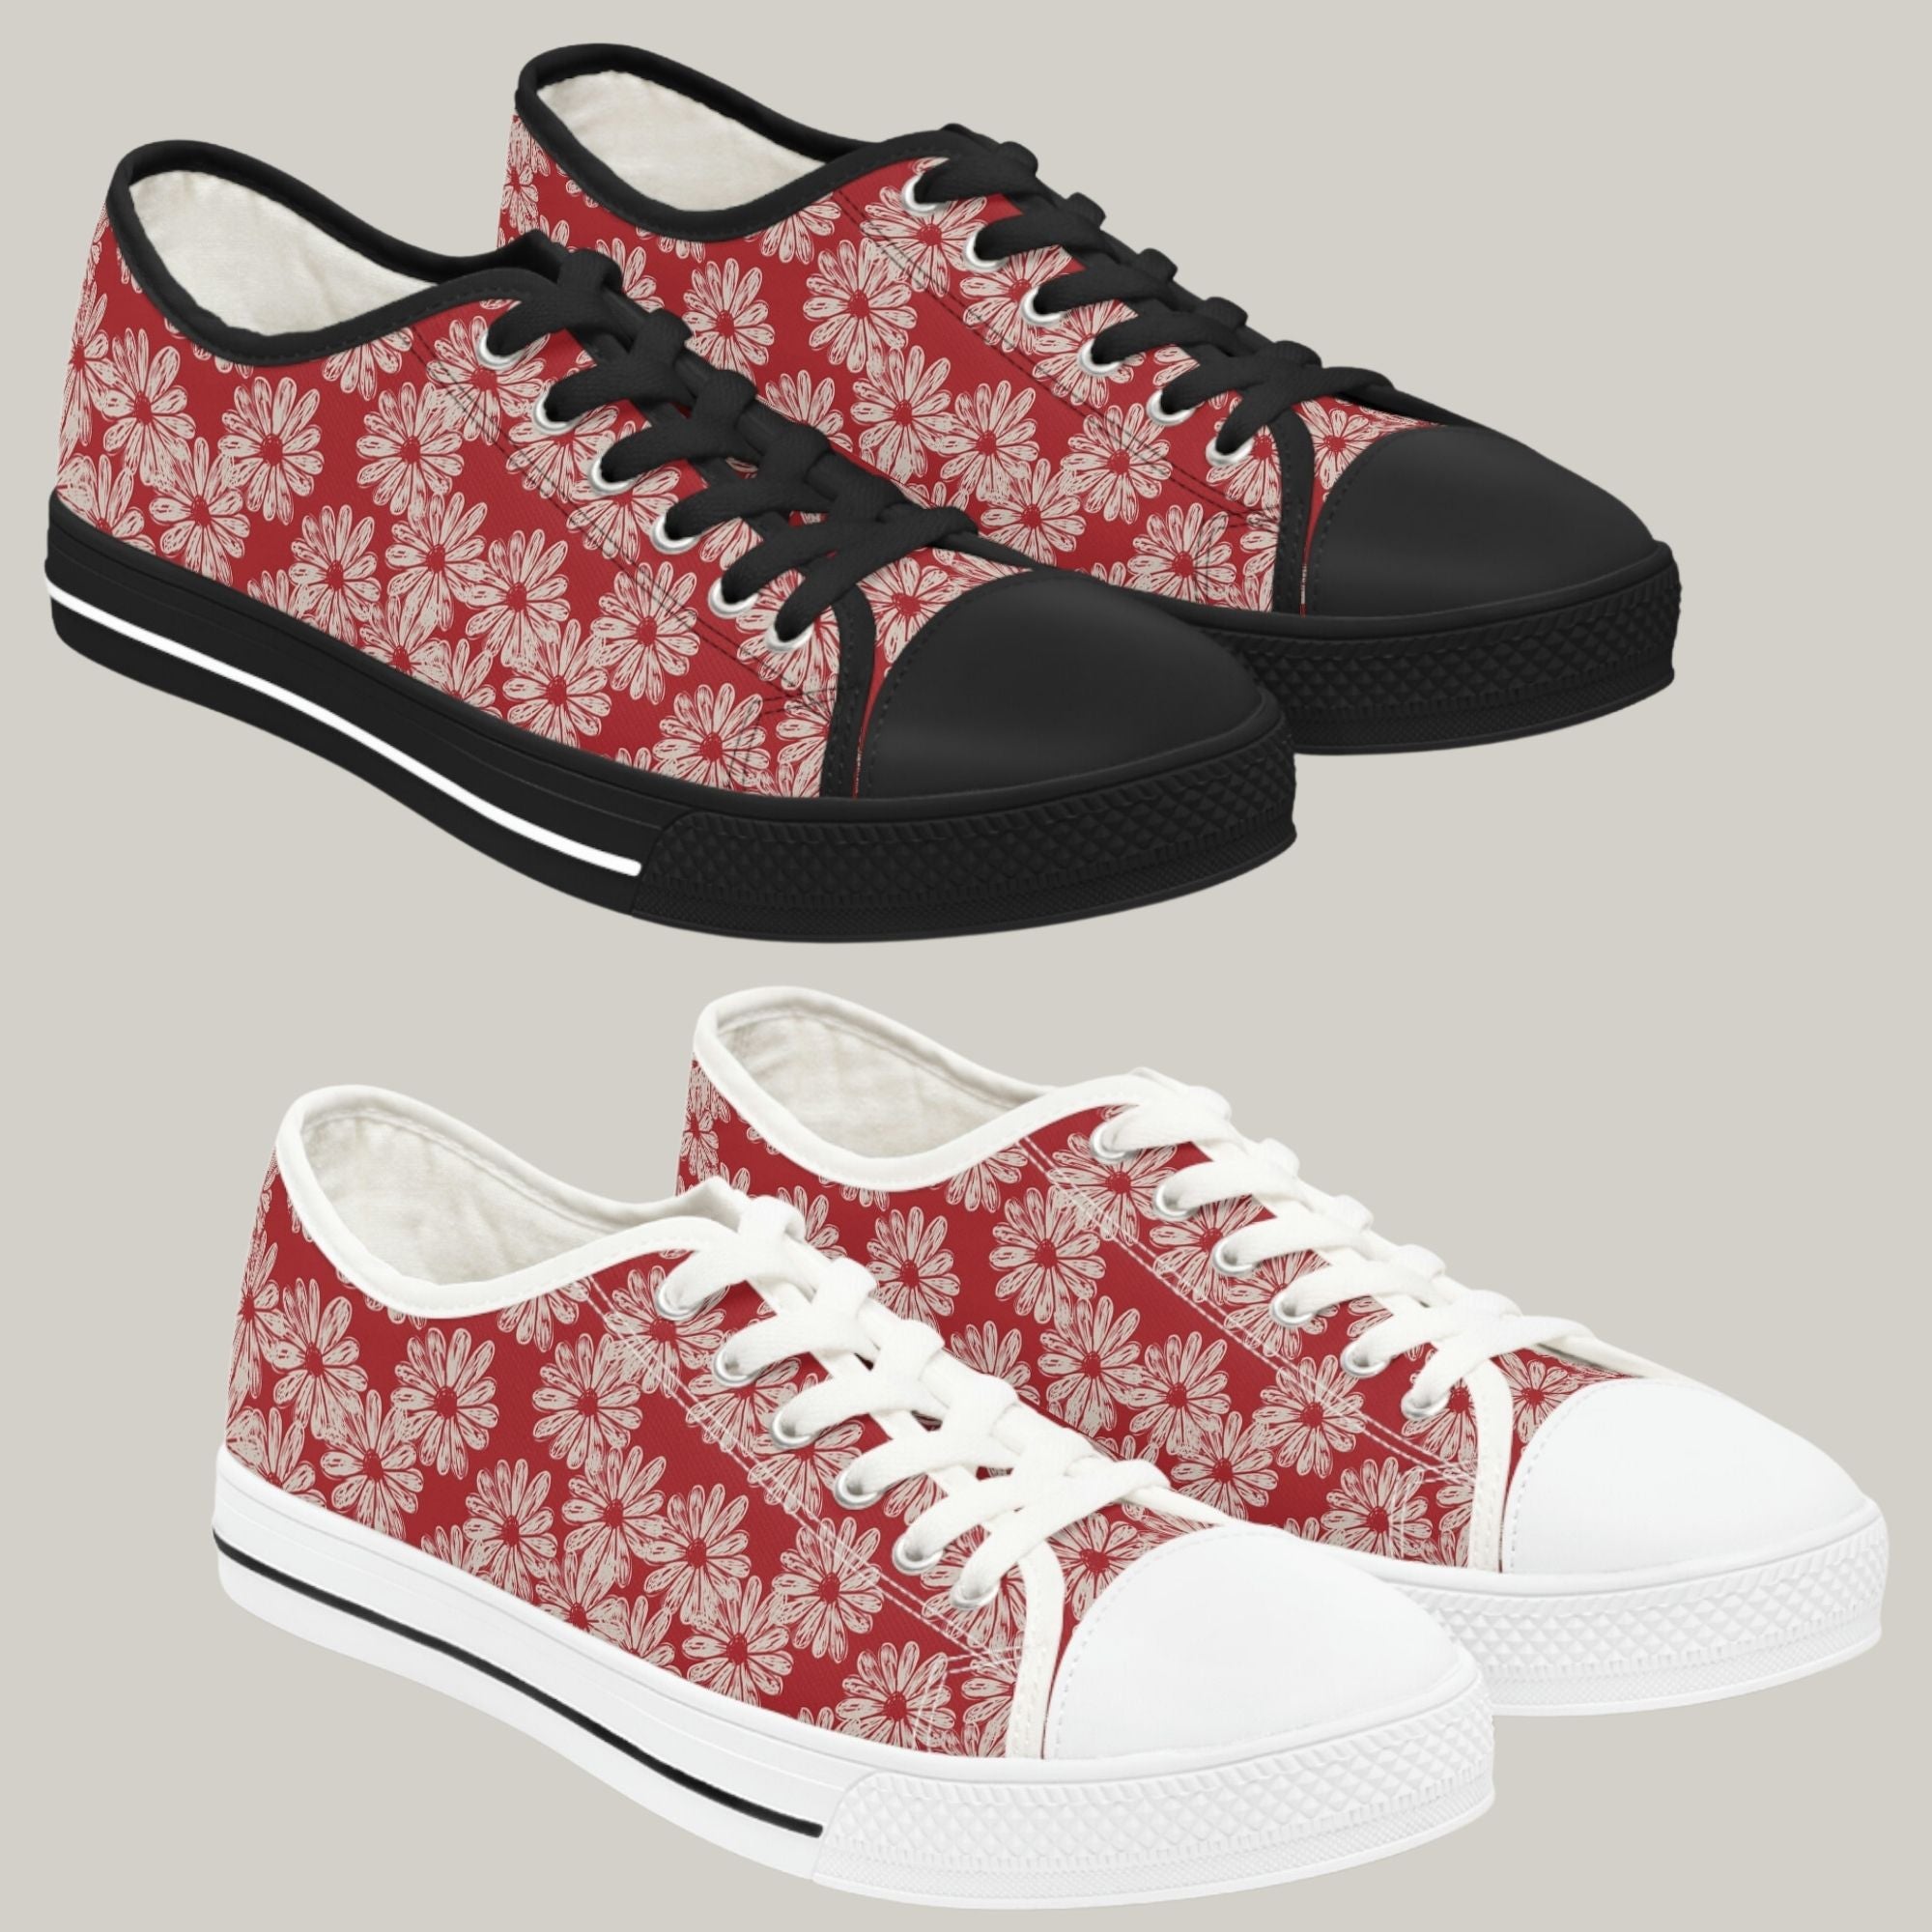 SWEET DAISY RED - Women's Low Top Sneakers Black and White Sole